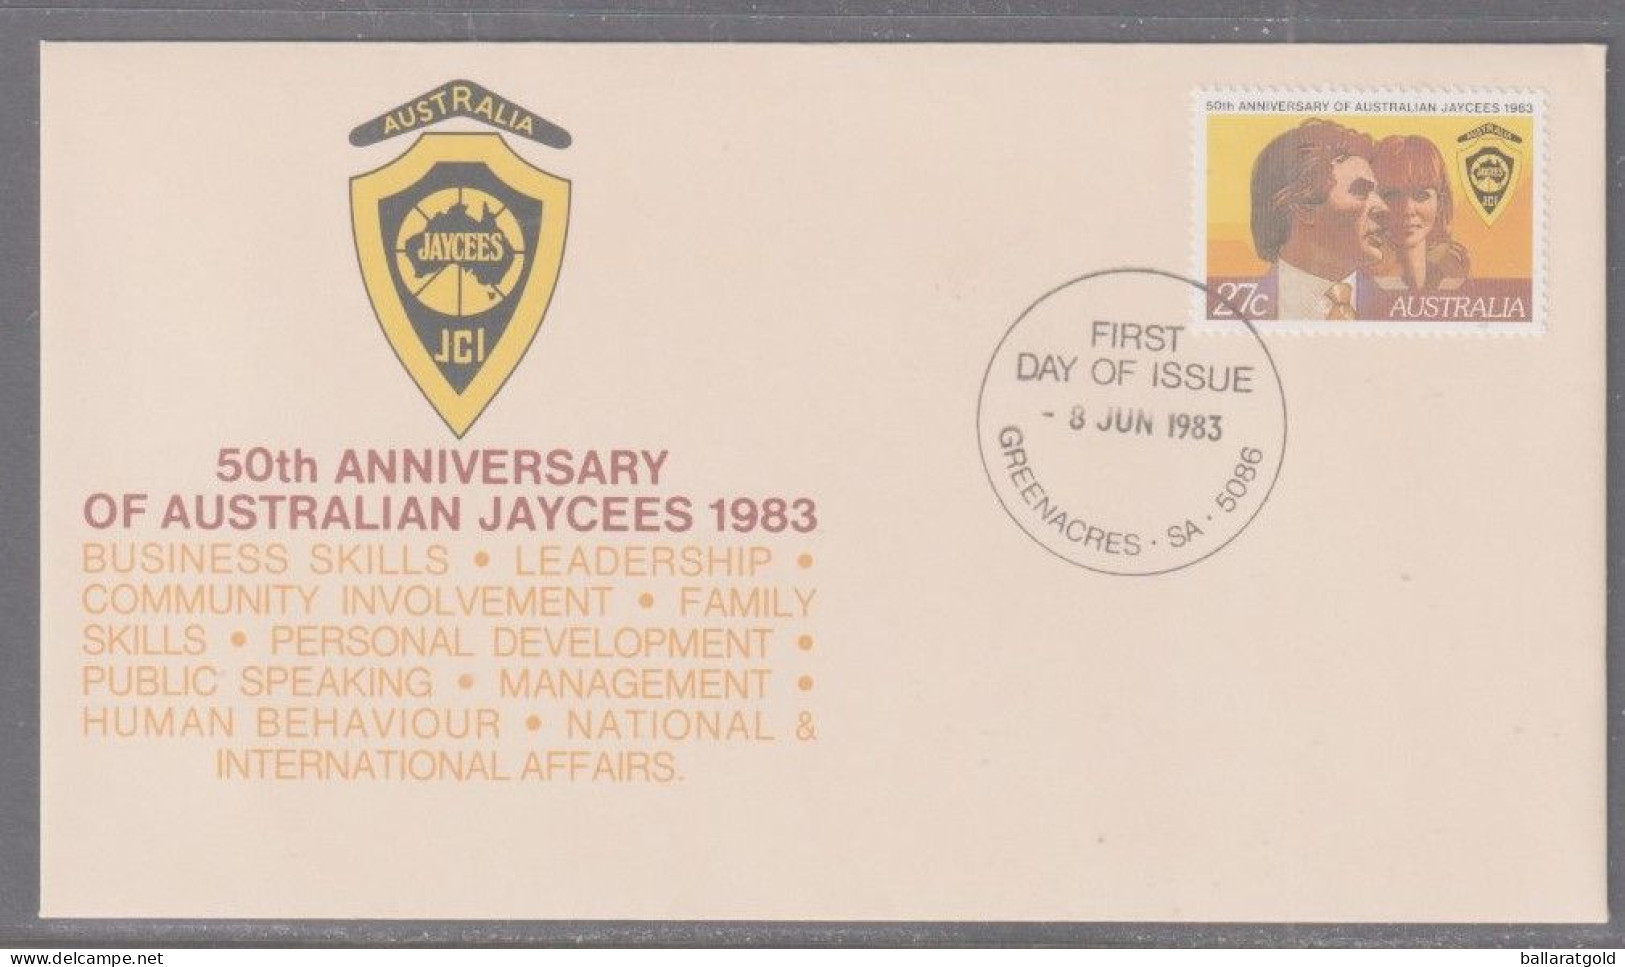 Australia 1983 - Jaycees 50th Anniversary First Day Cover - Cancellation Greenacres SA - Covers & Documents